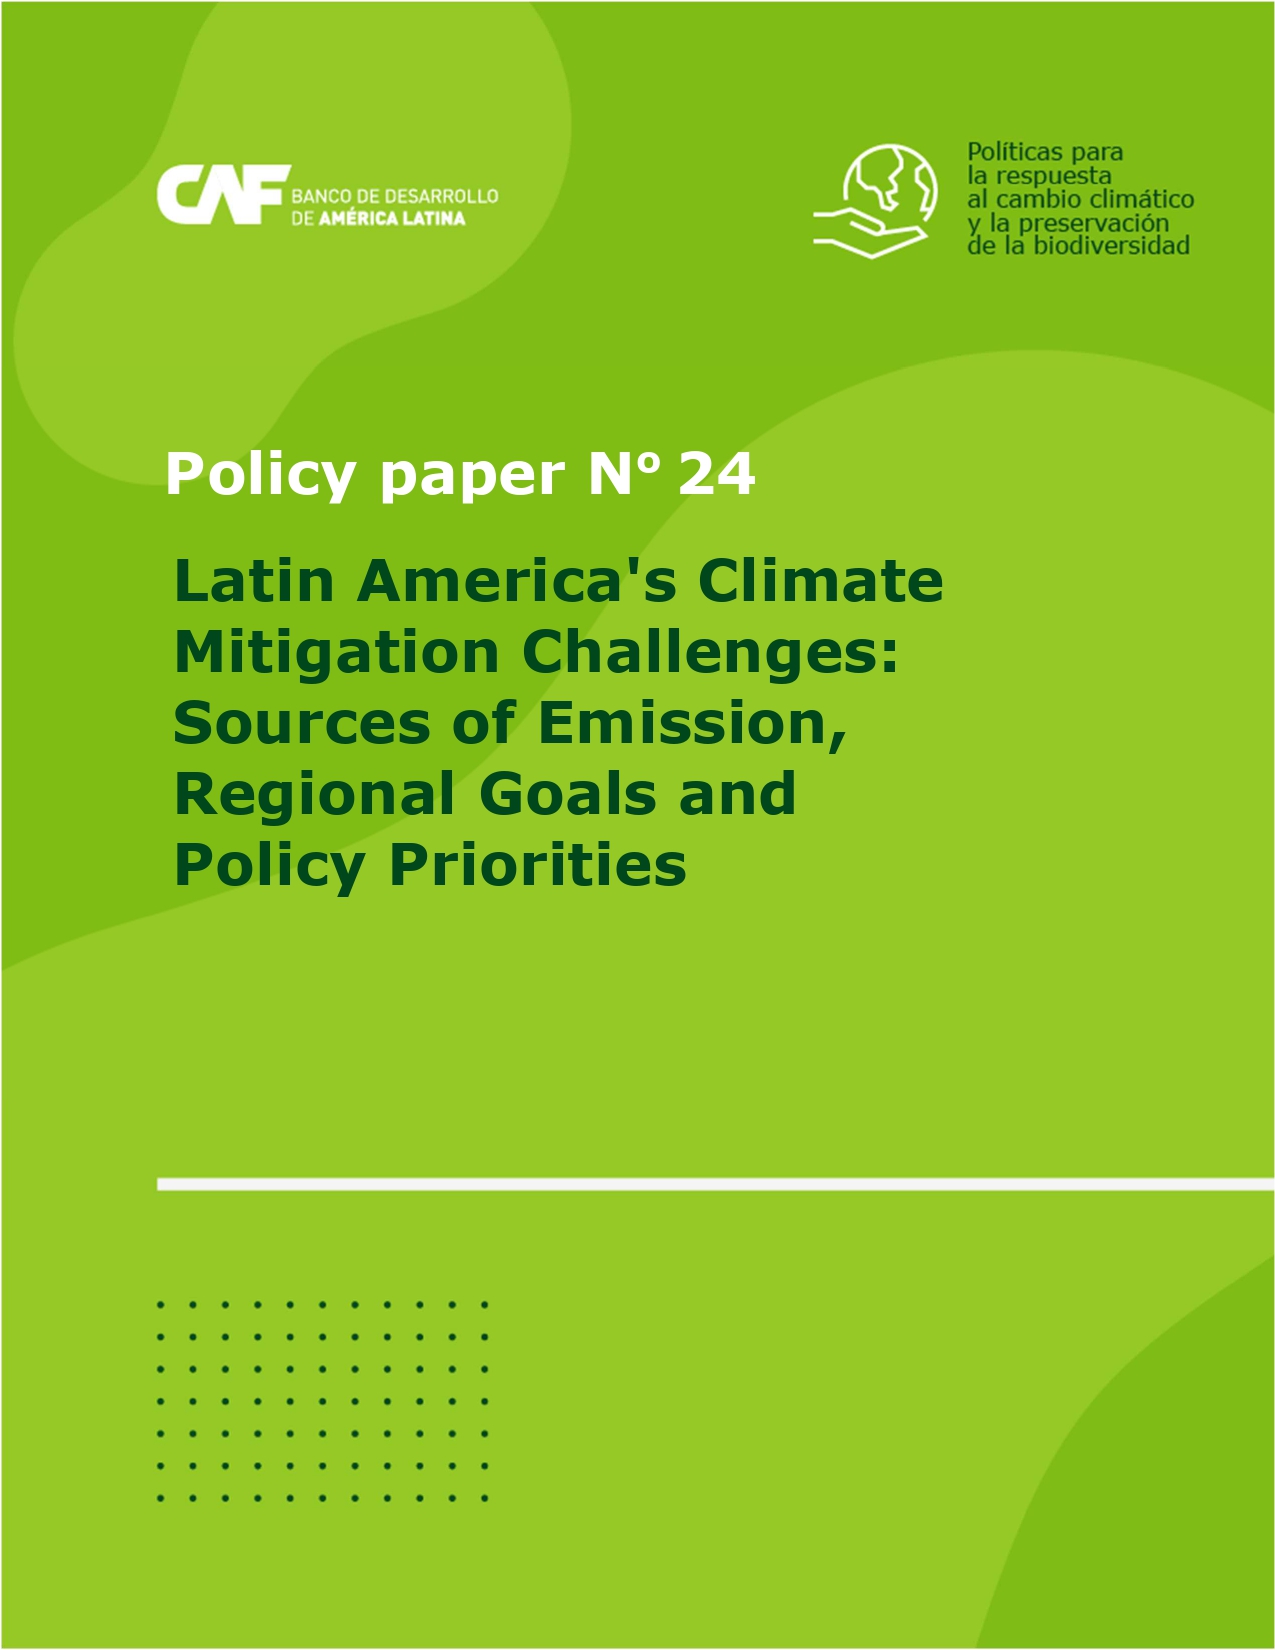 Latin America's Climate Mitigation Challenges: Sources of Emission, Regional Goals and Policy Priorities